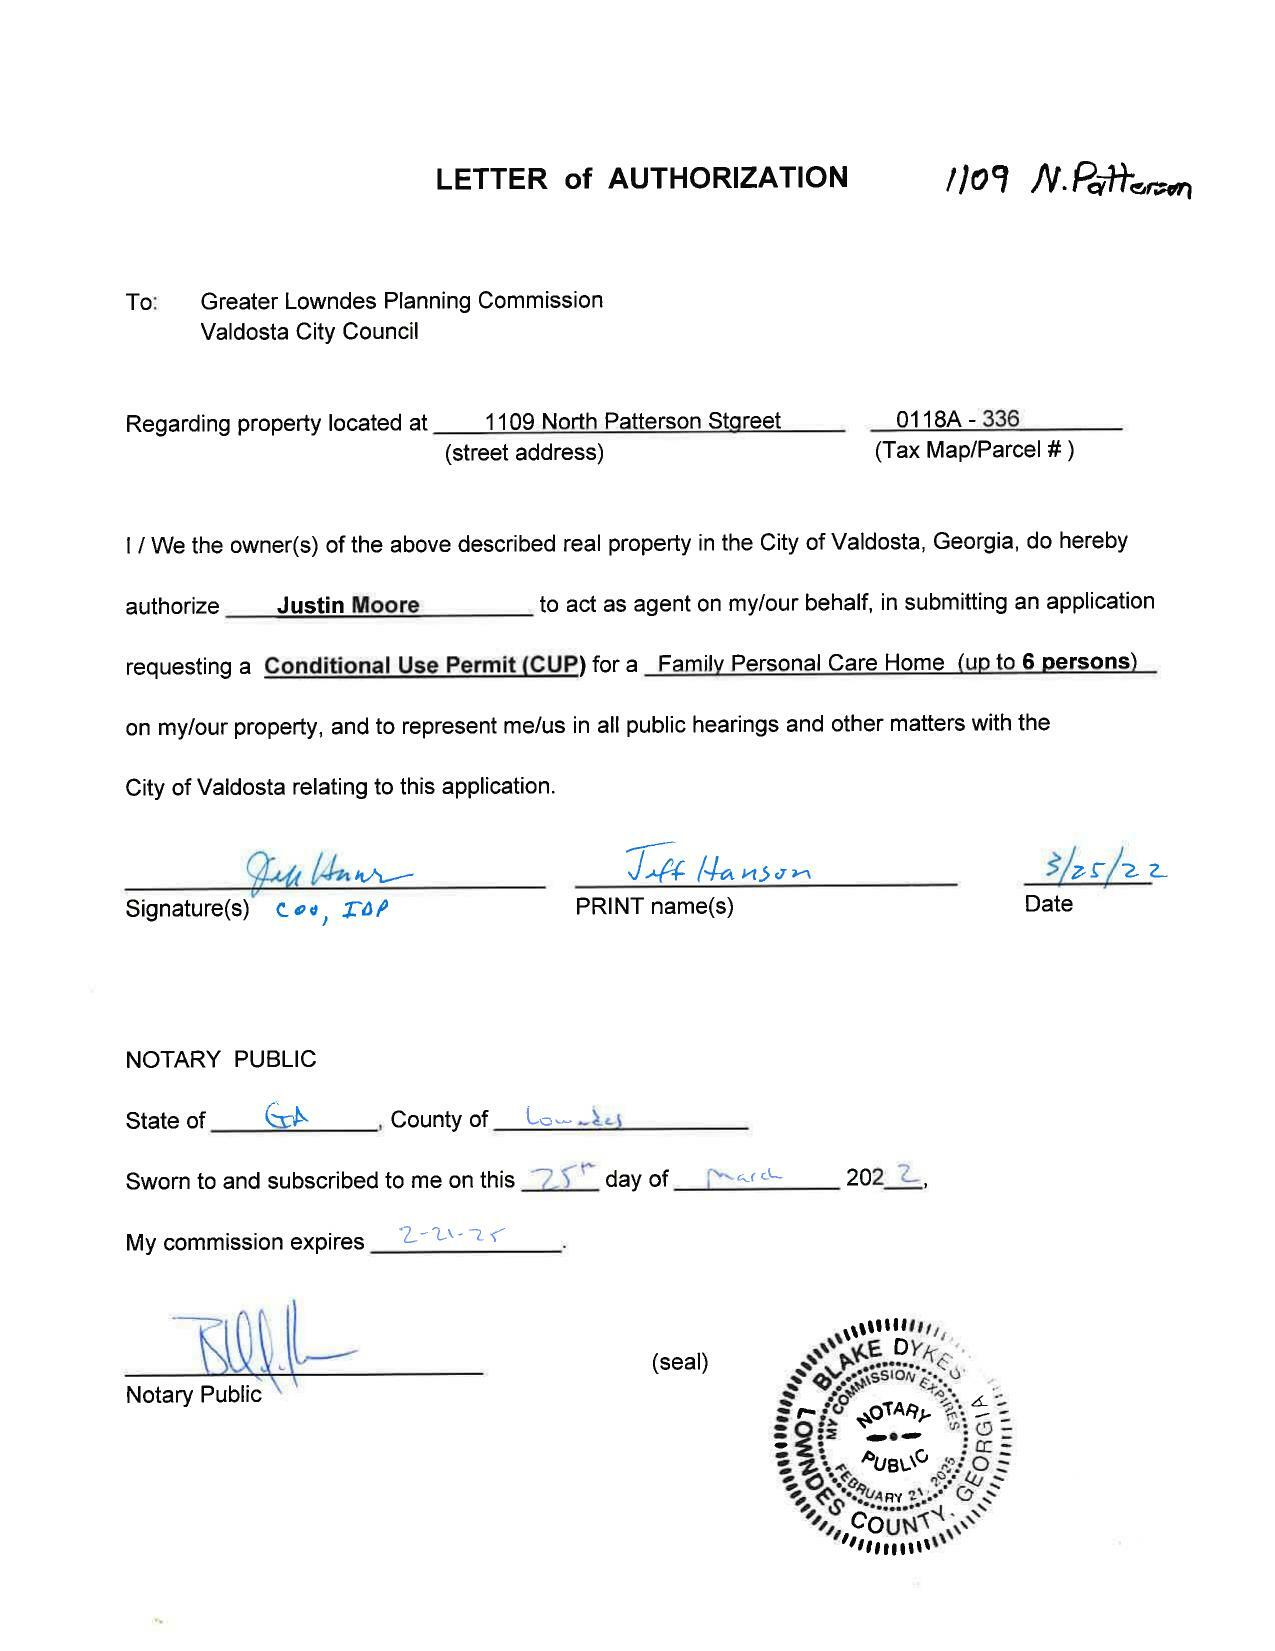 LETTER of AUTHORIZATION for 0118A 336